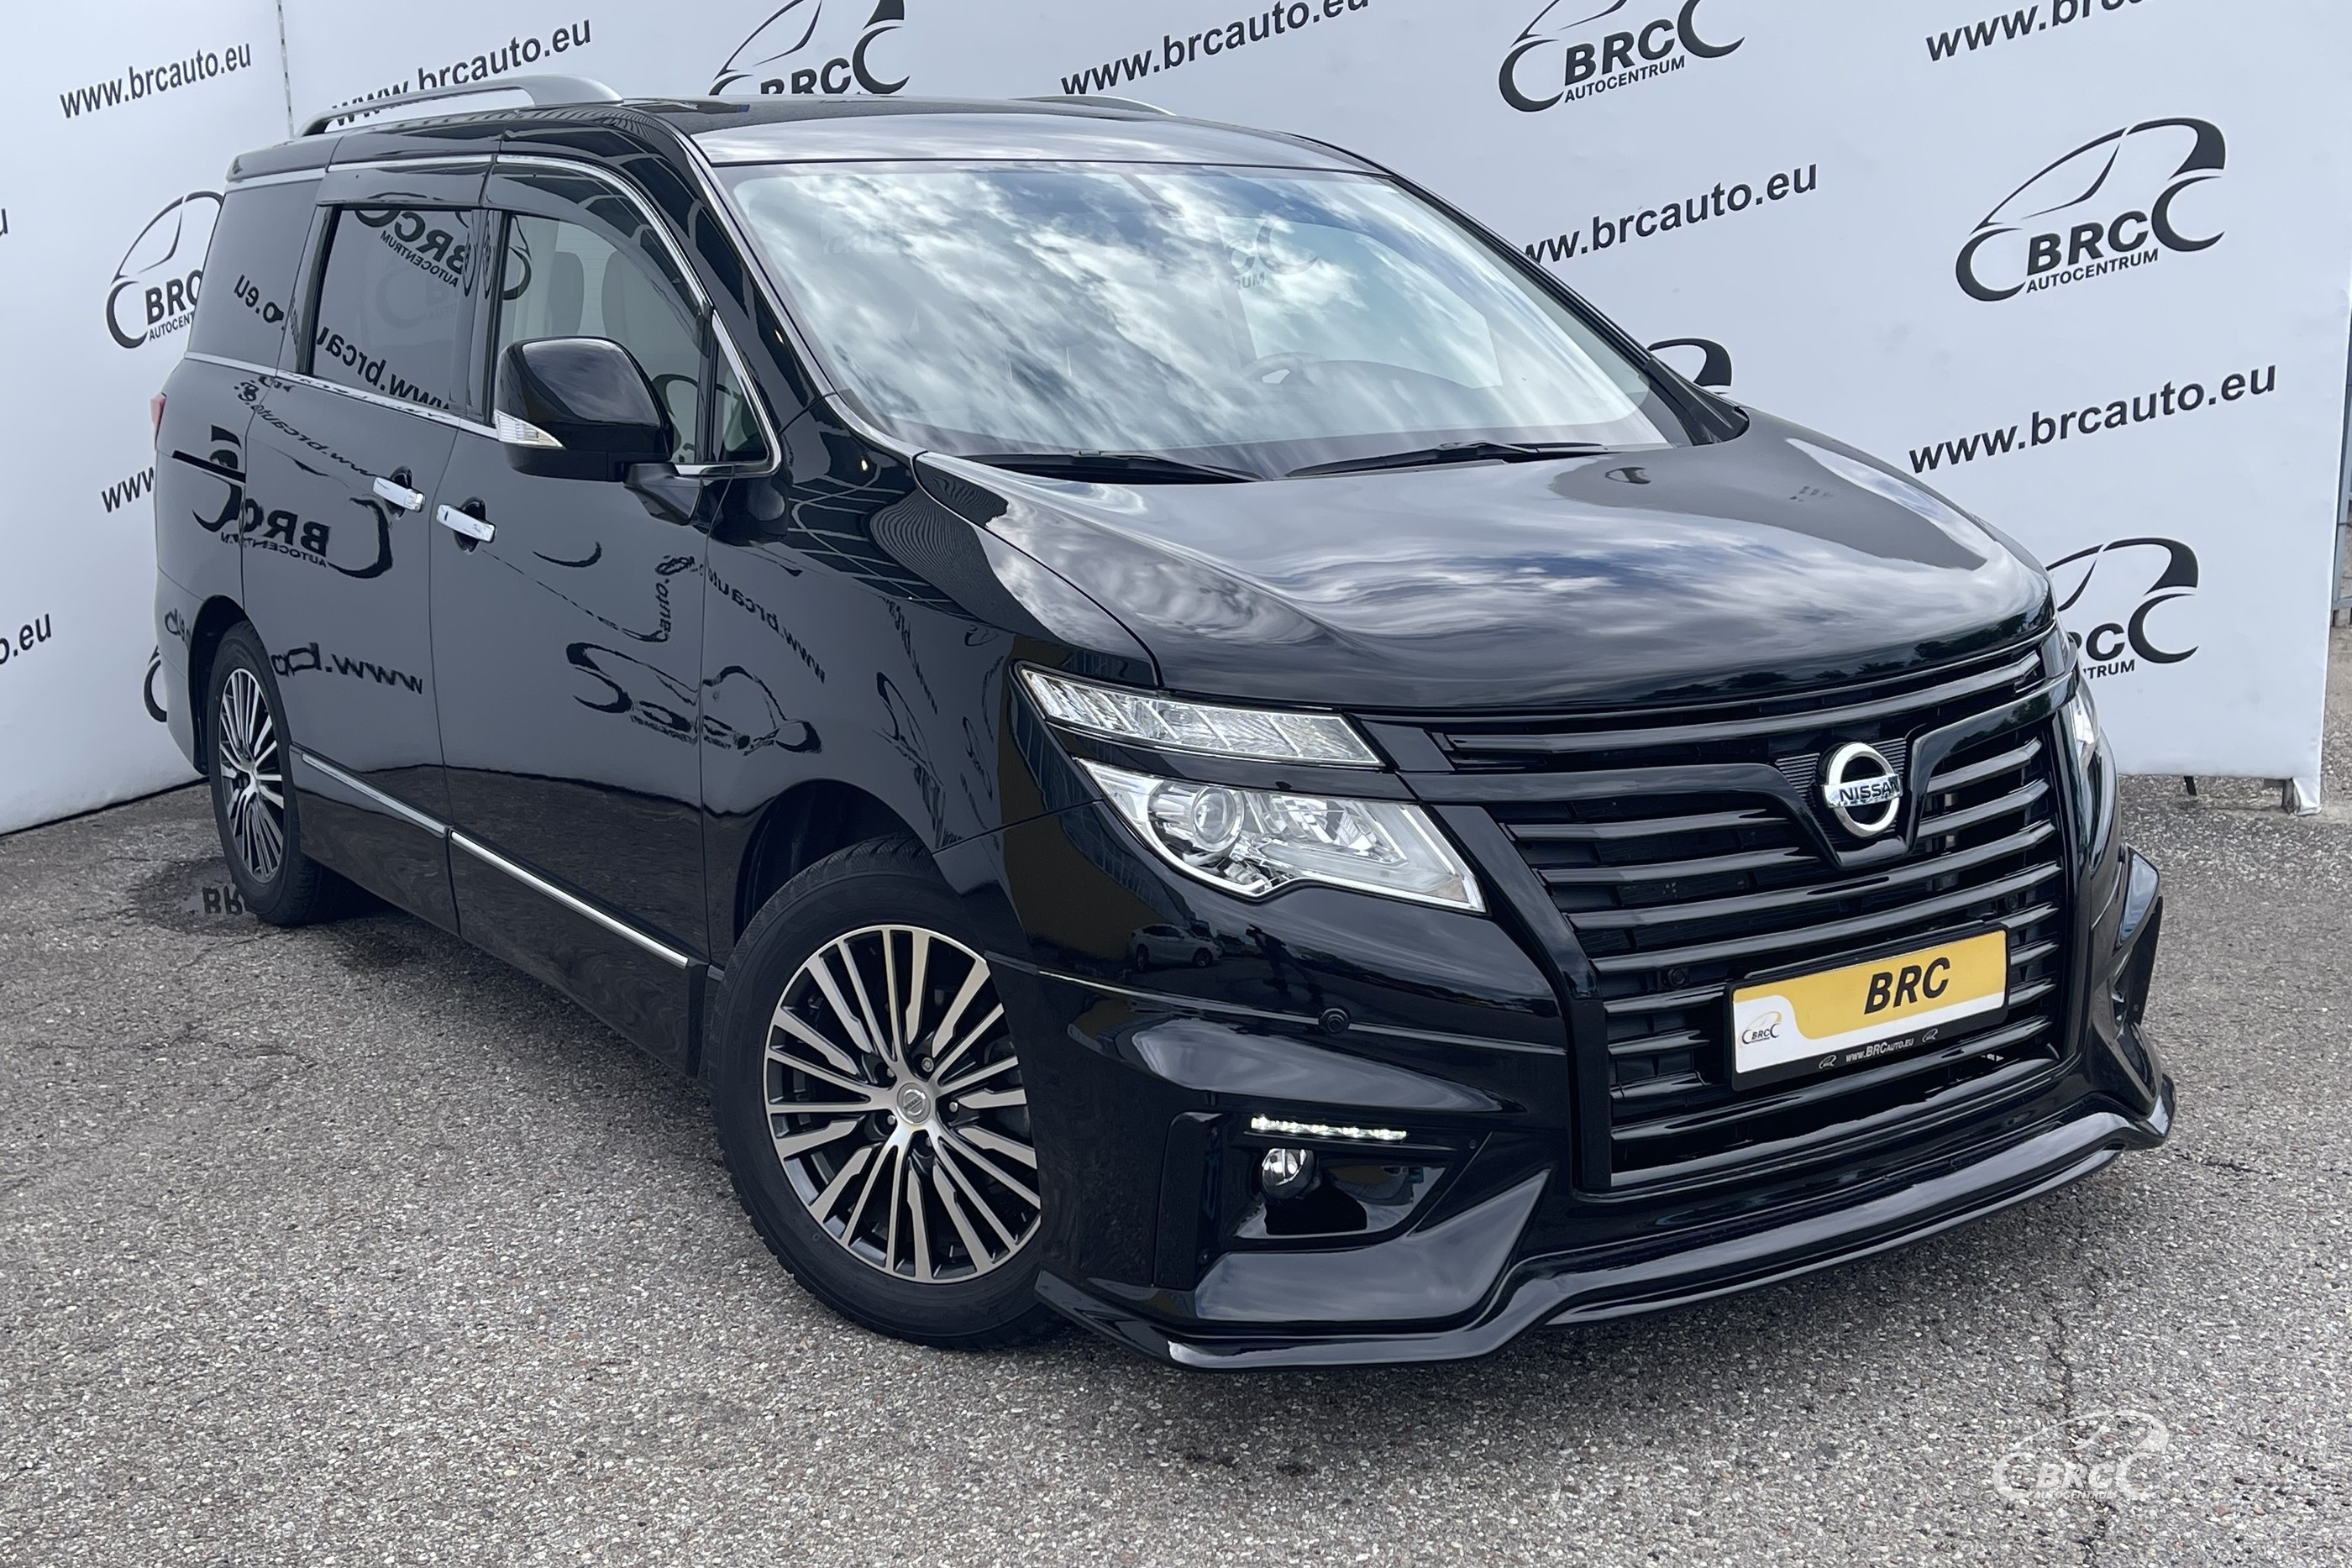 Nissan Quest 3.5 V6 Highway Star Automatas 